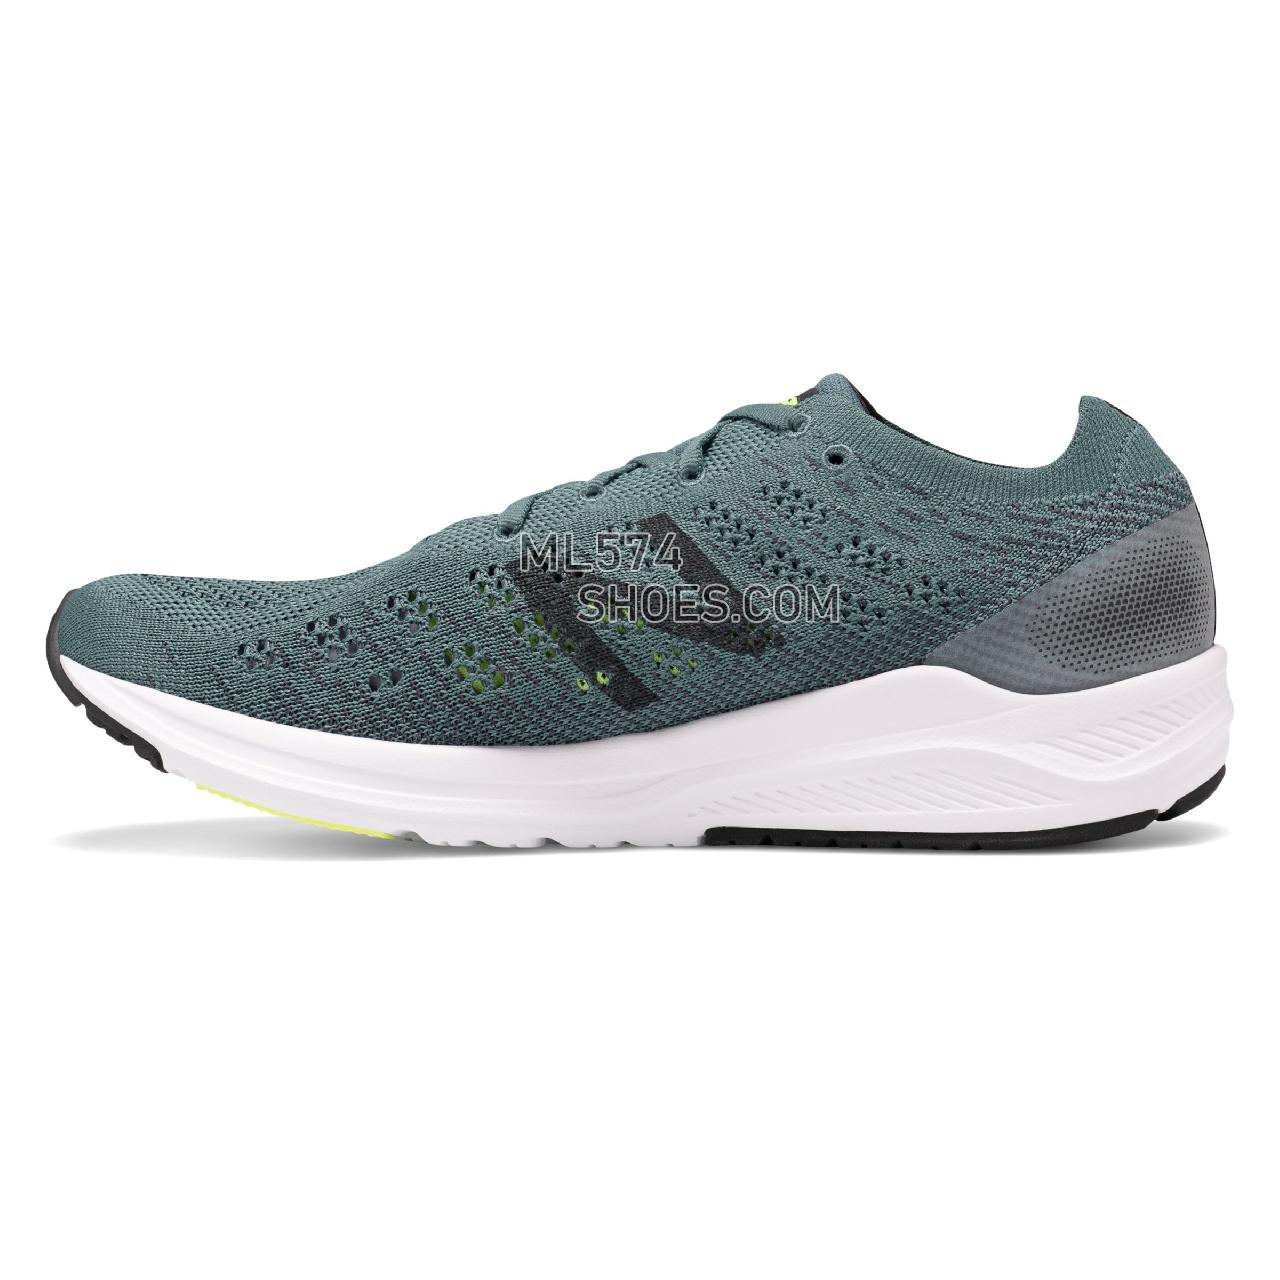 New Balance 890v7 - Men's Neutral Running - Dark Agave with Orca and Bleached Lime Glo - M890GG7